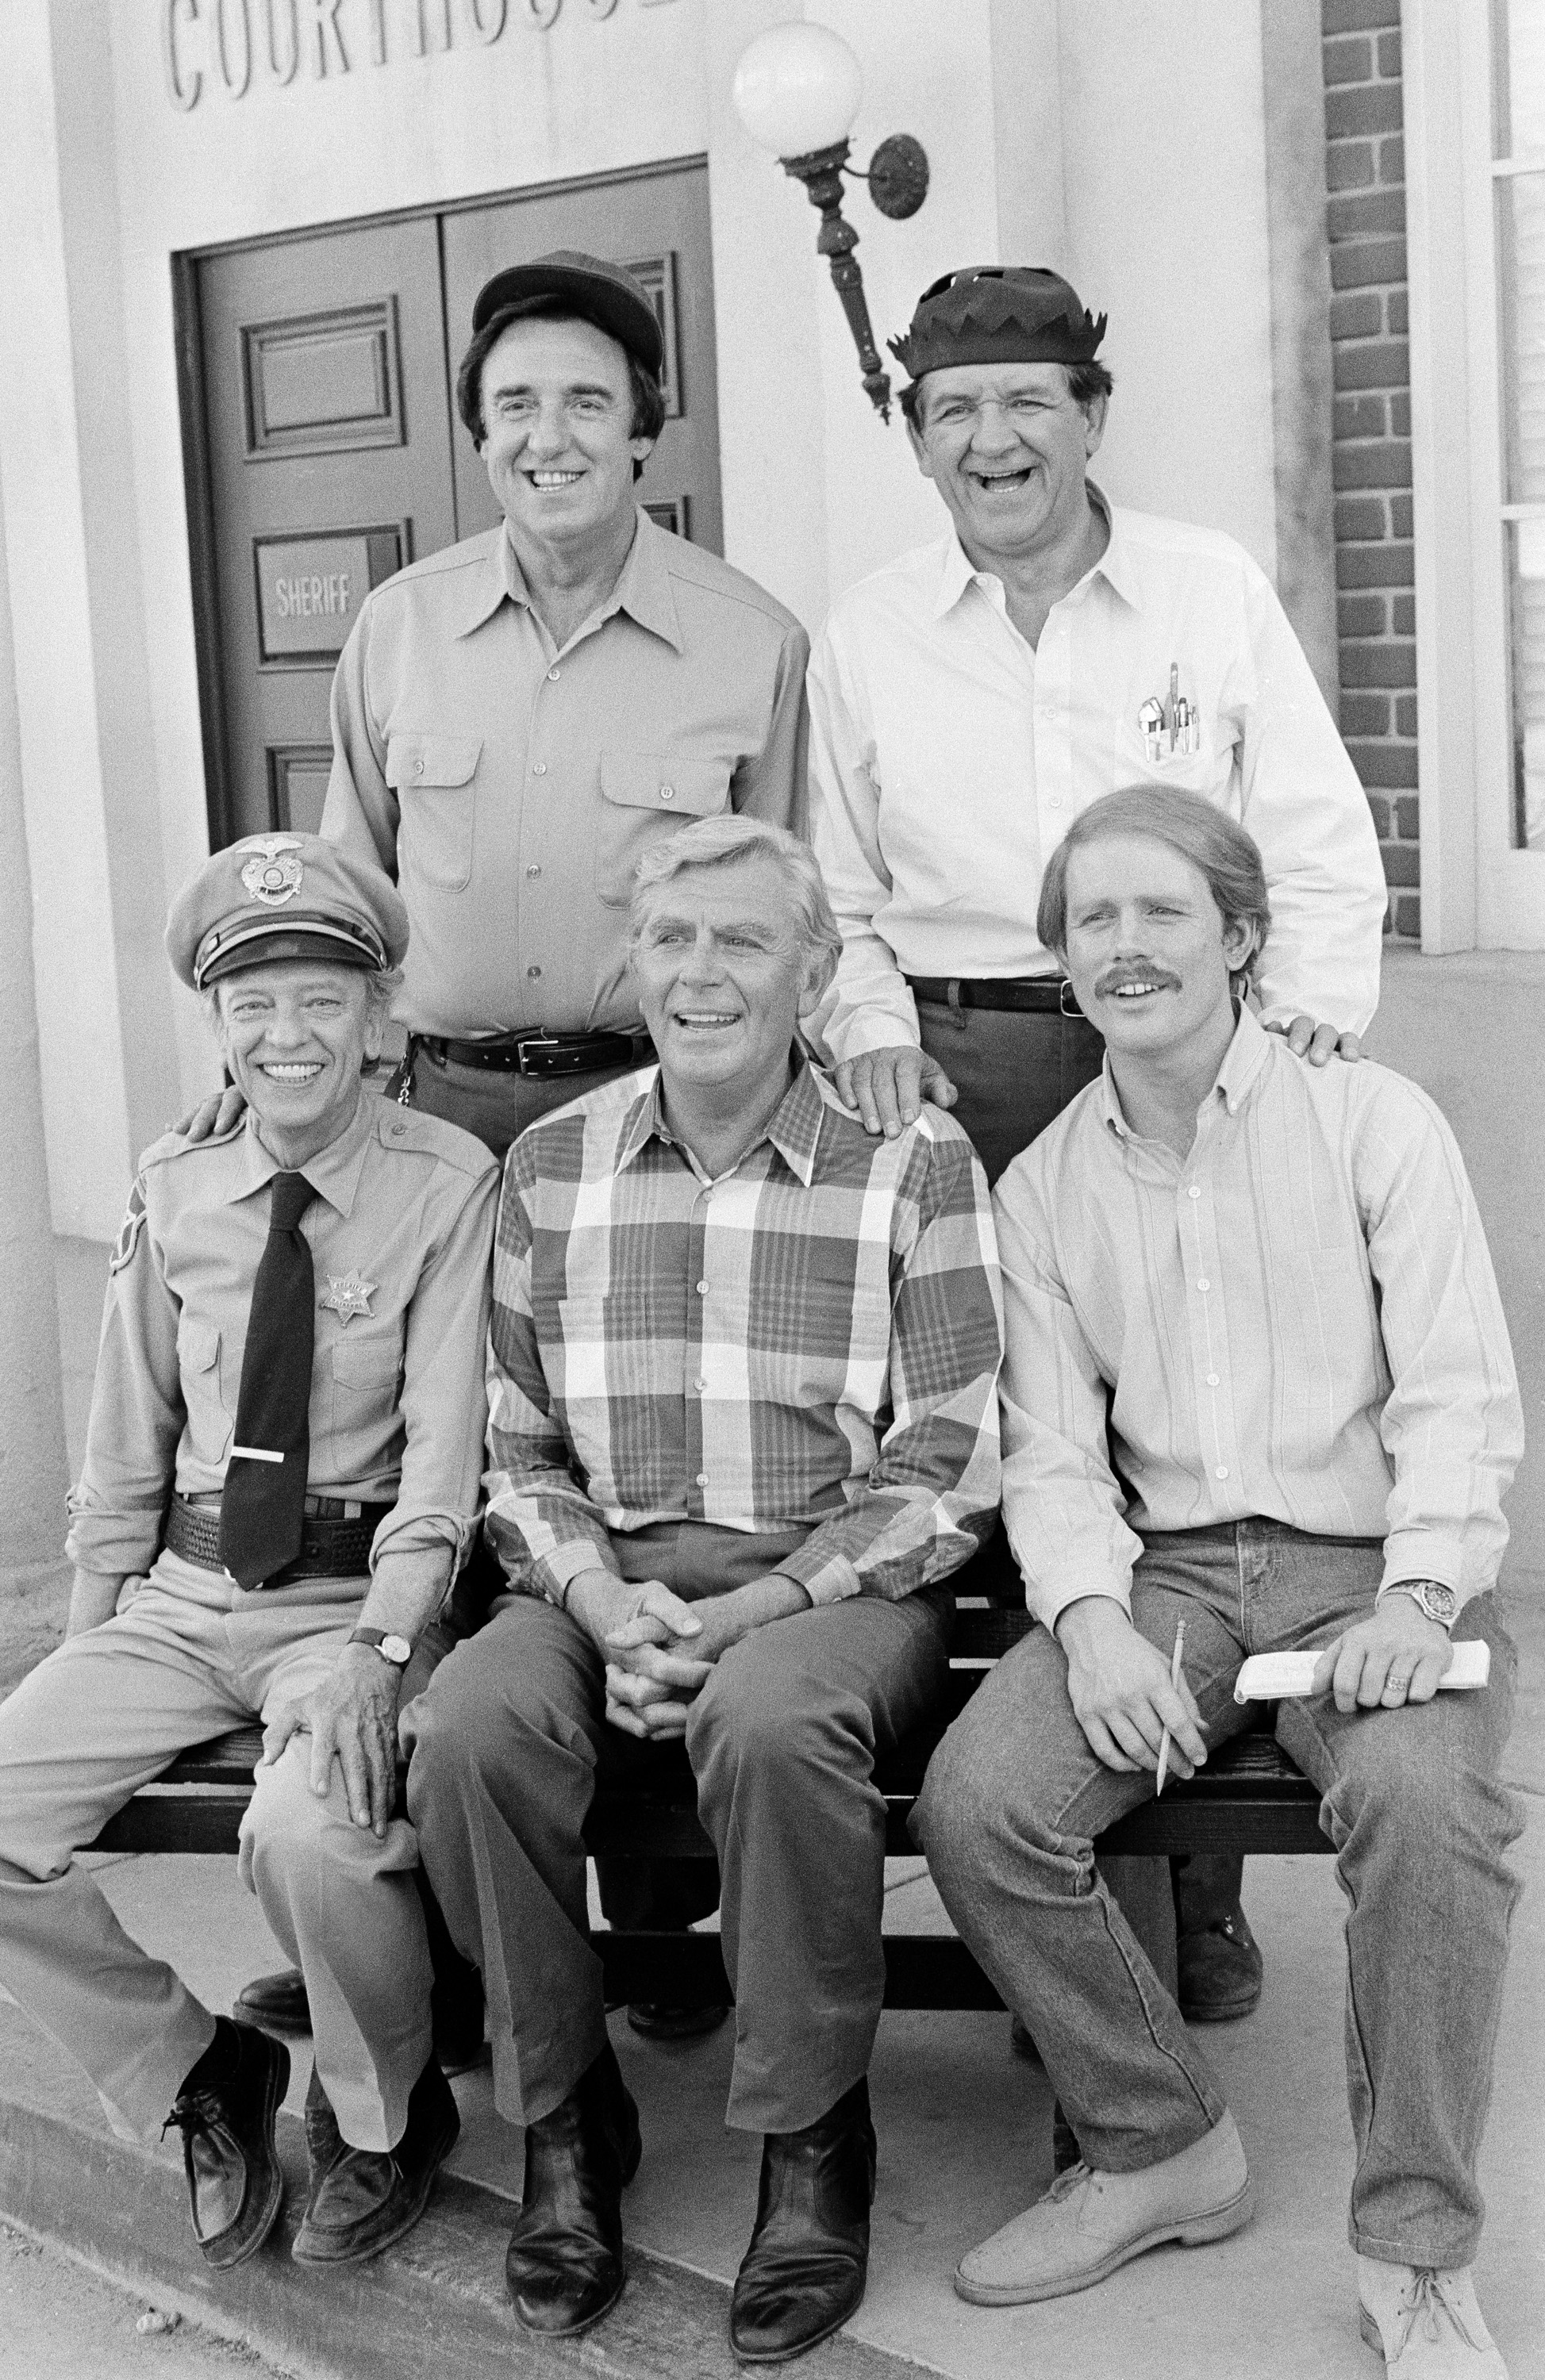 'Return to Mayberry' partial cast: (L to R standing): Jim Nabors as Gomer Pyle and George Lindsey as Goober Pyle; (L to R seated): Don Knotts as Barney Fife, Andy Griffith as Andy Taylor, and Ron Howard as Opie Taylor